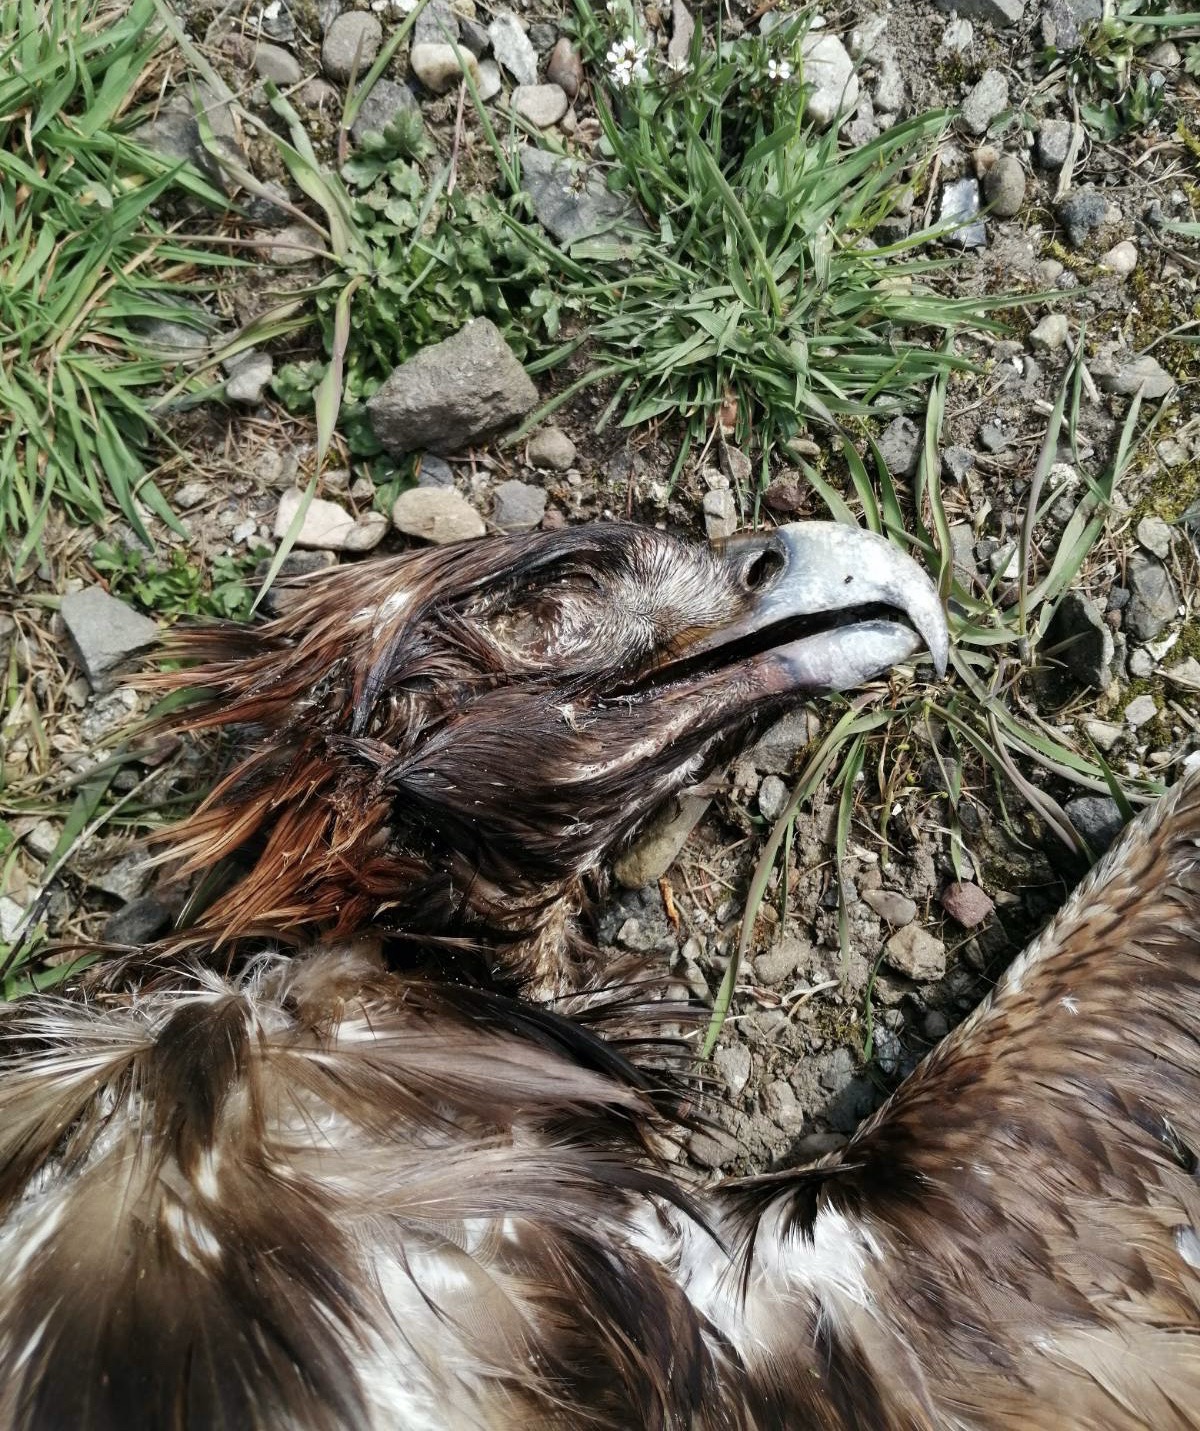 The bird's corpse was recovered and examined by police. 